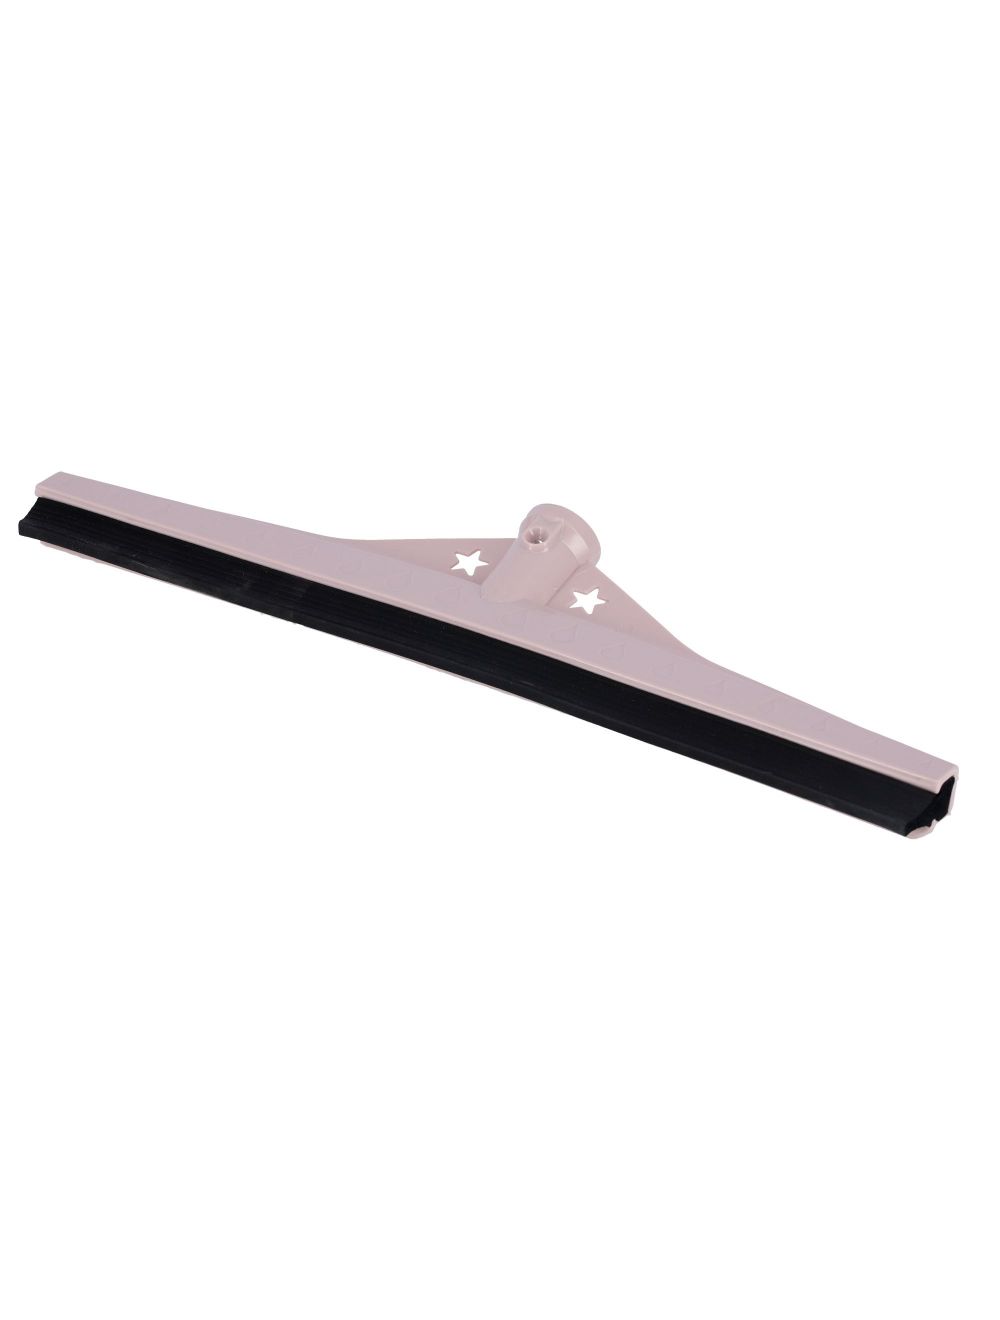 Delcasa DC1131 Ground Squeegee with Mug and Window Squeegee